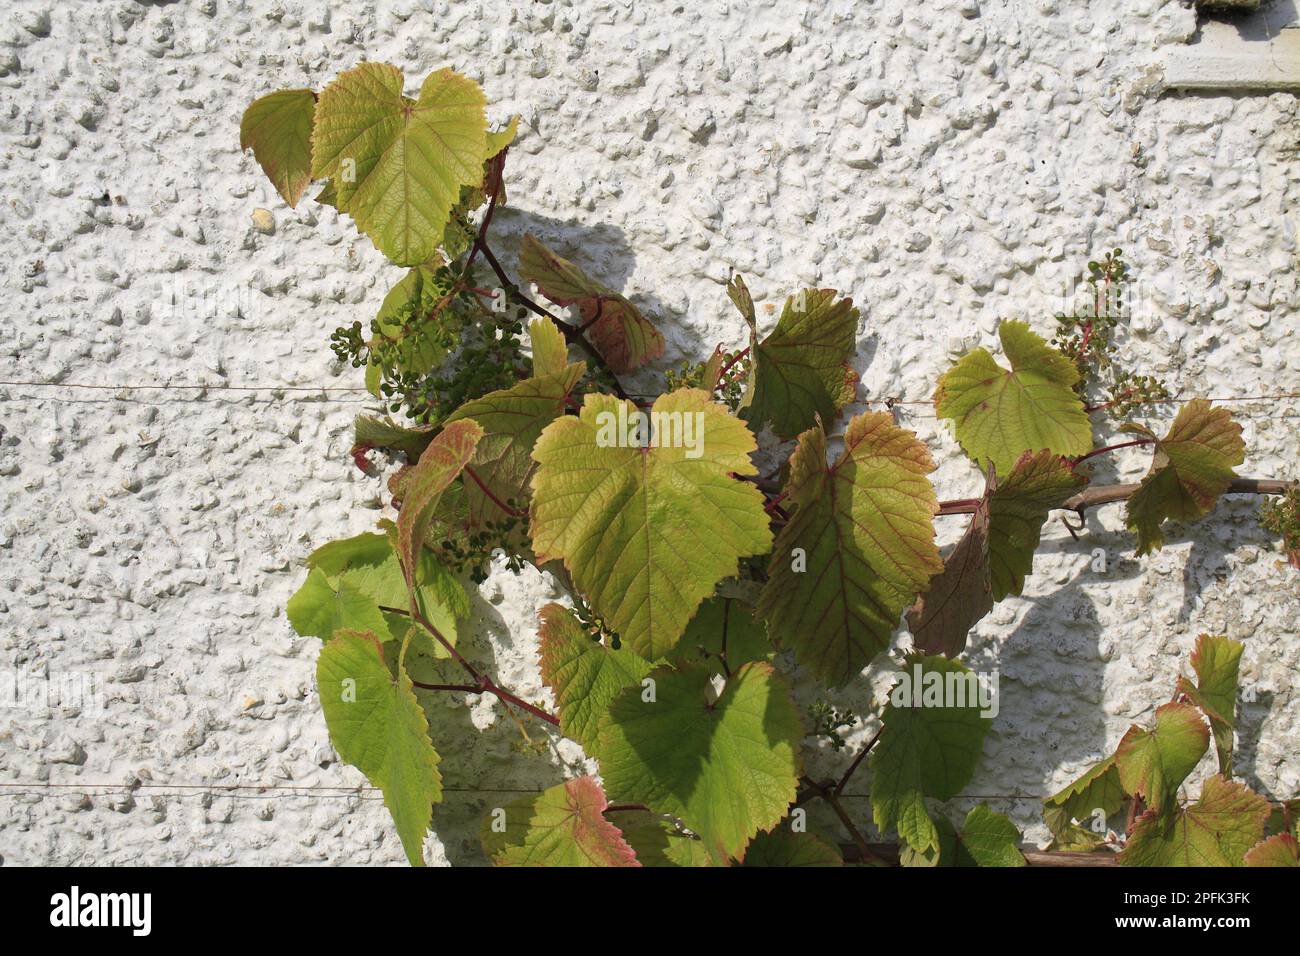 Grape vine (Vitis vinifera) leaves and developing fruit growing on the wall in the garden, Bembridge, Isle of Wight, England, United Kingdom Stock Photo